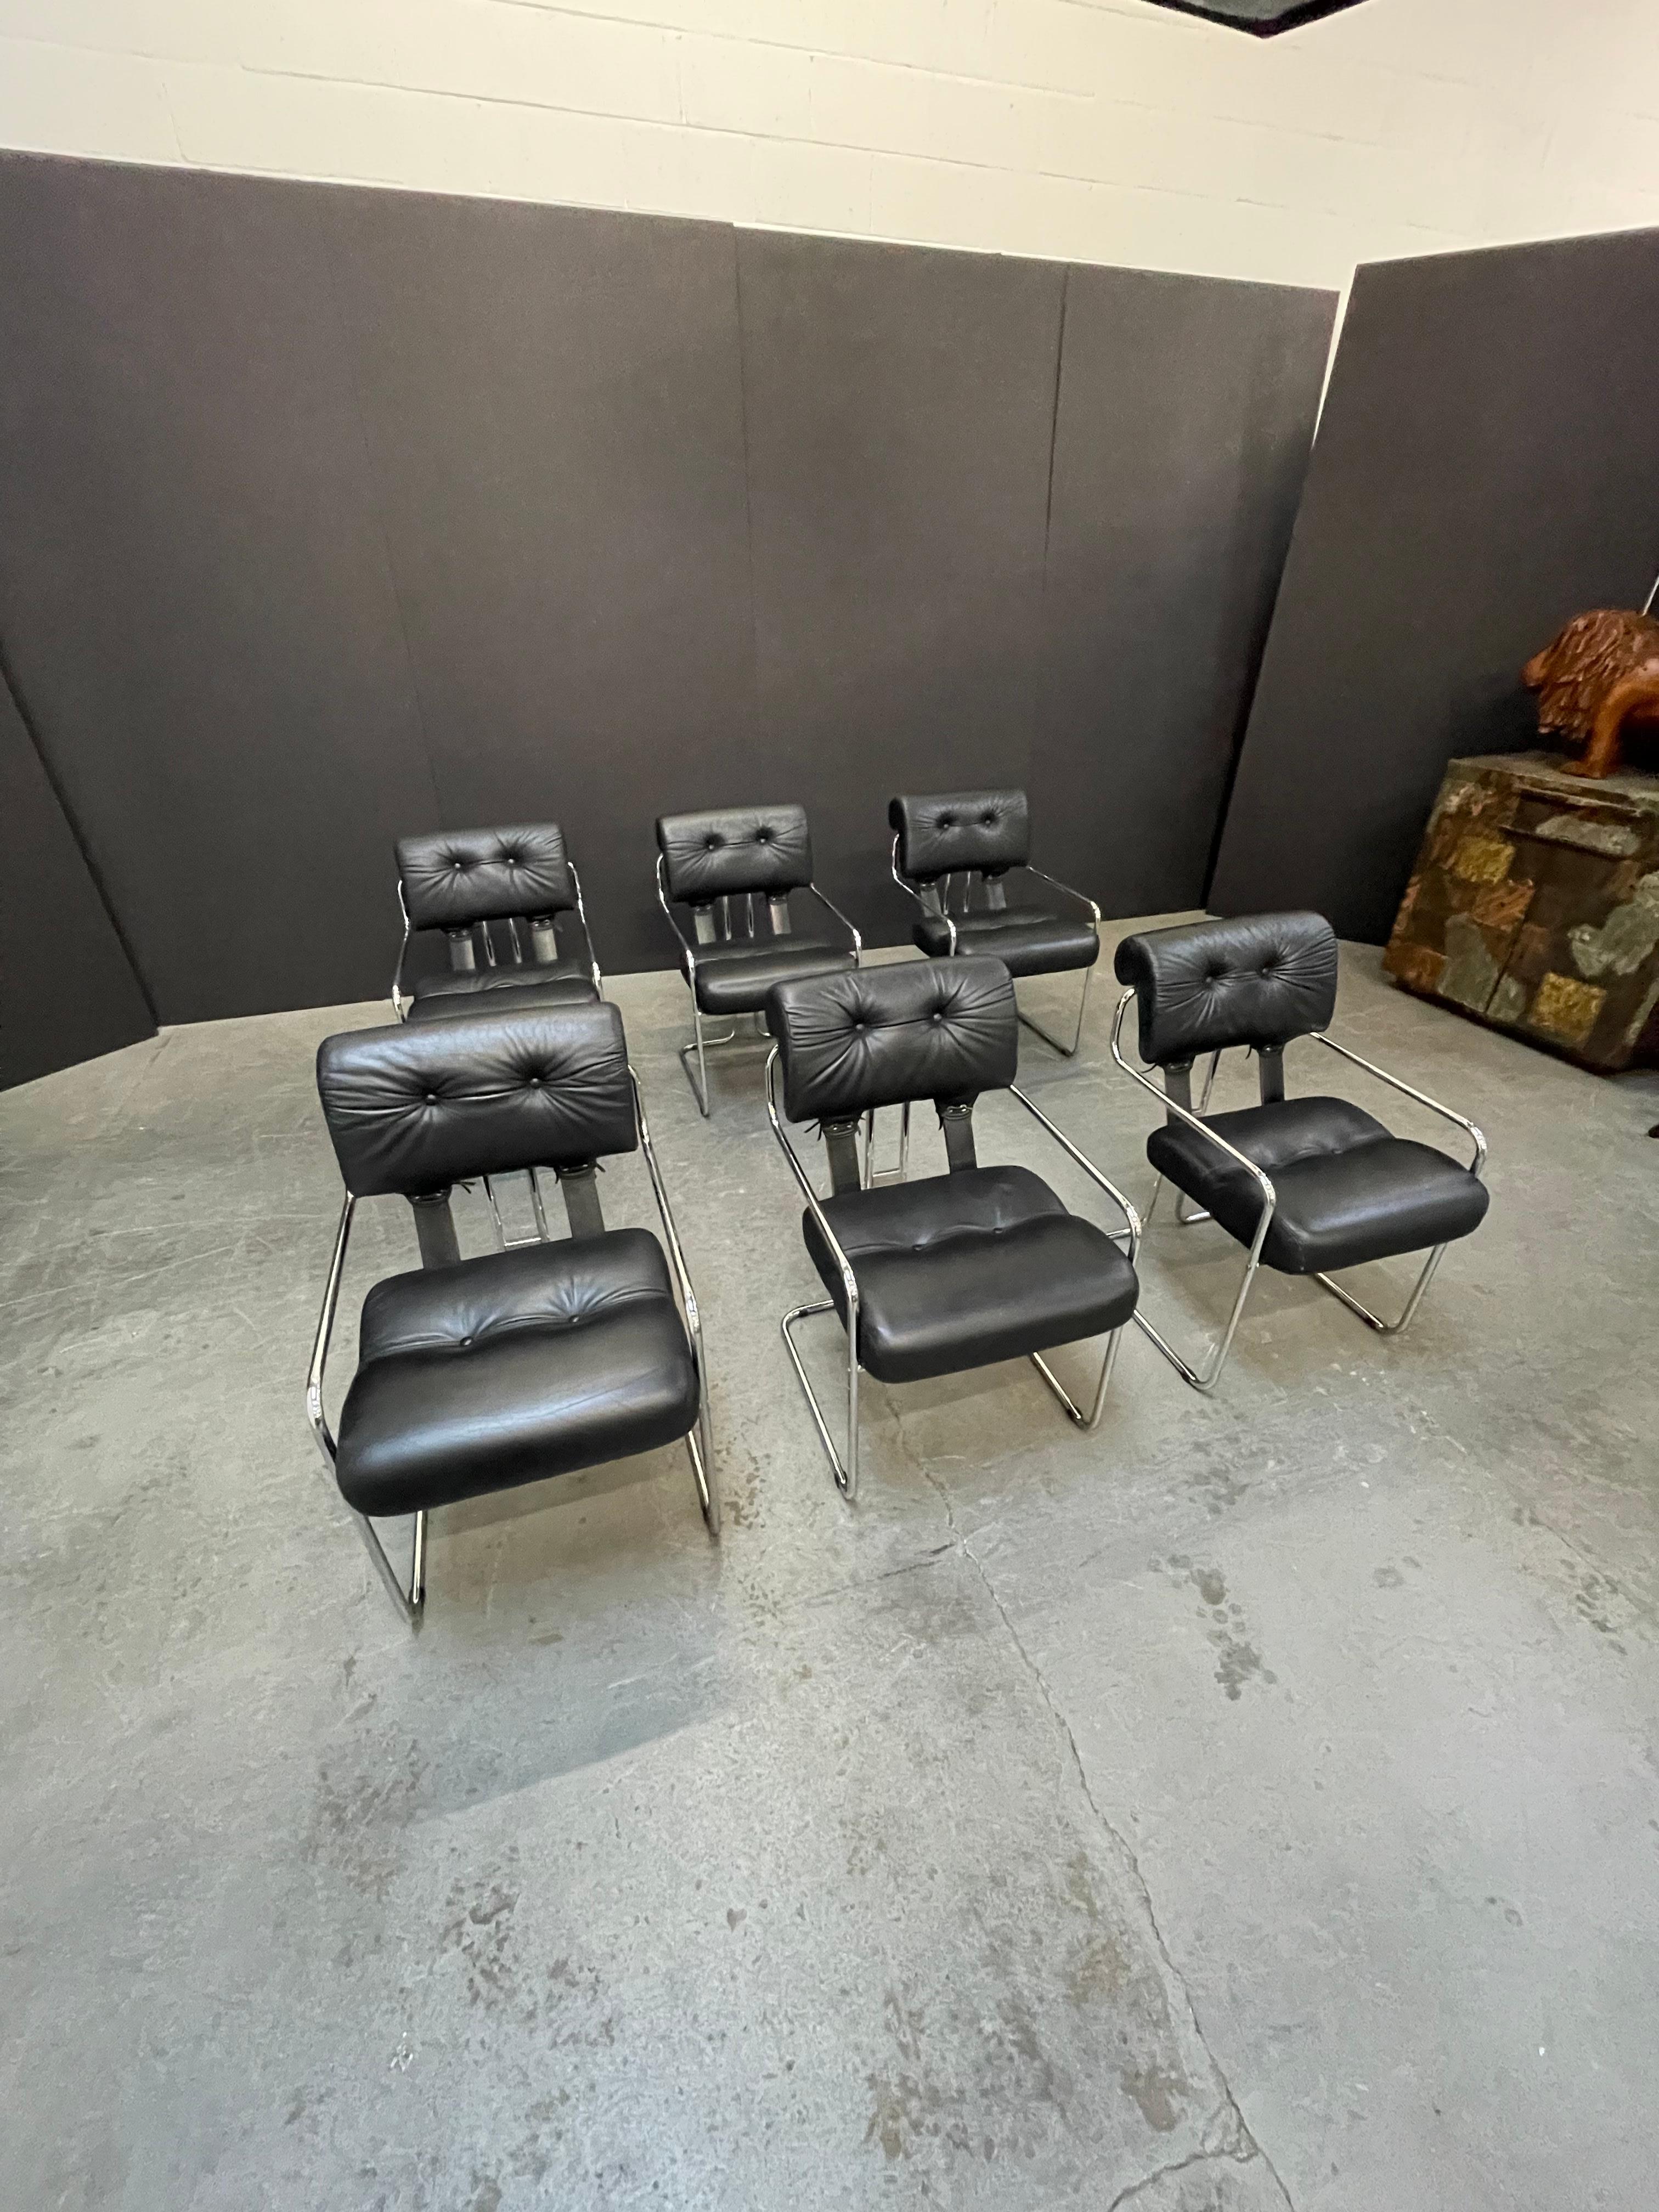 Currently, the most coveted dining chairs by interior designers are 'Tucroma' chairs by Guido Faleschini for i4 Mariani, and we have this incredible set of six (6) Tucroma armchairs in beautiful black leather with polished chrome frames. The seats